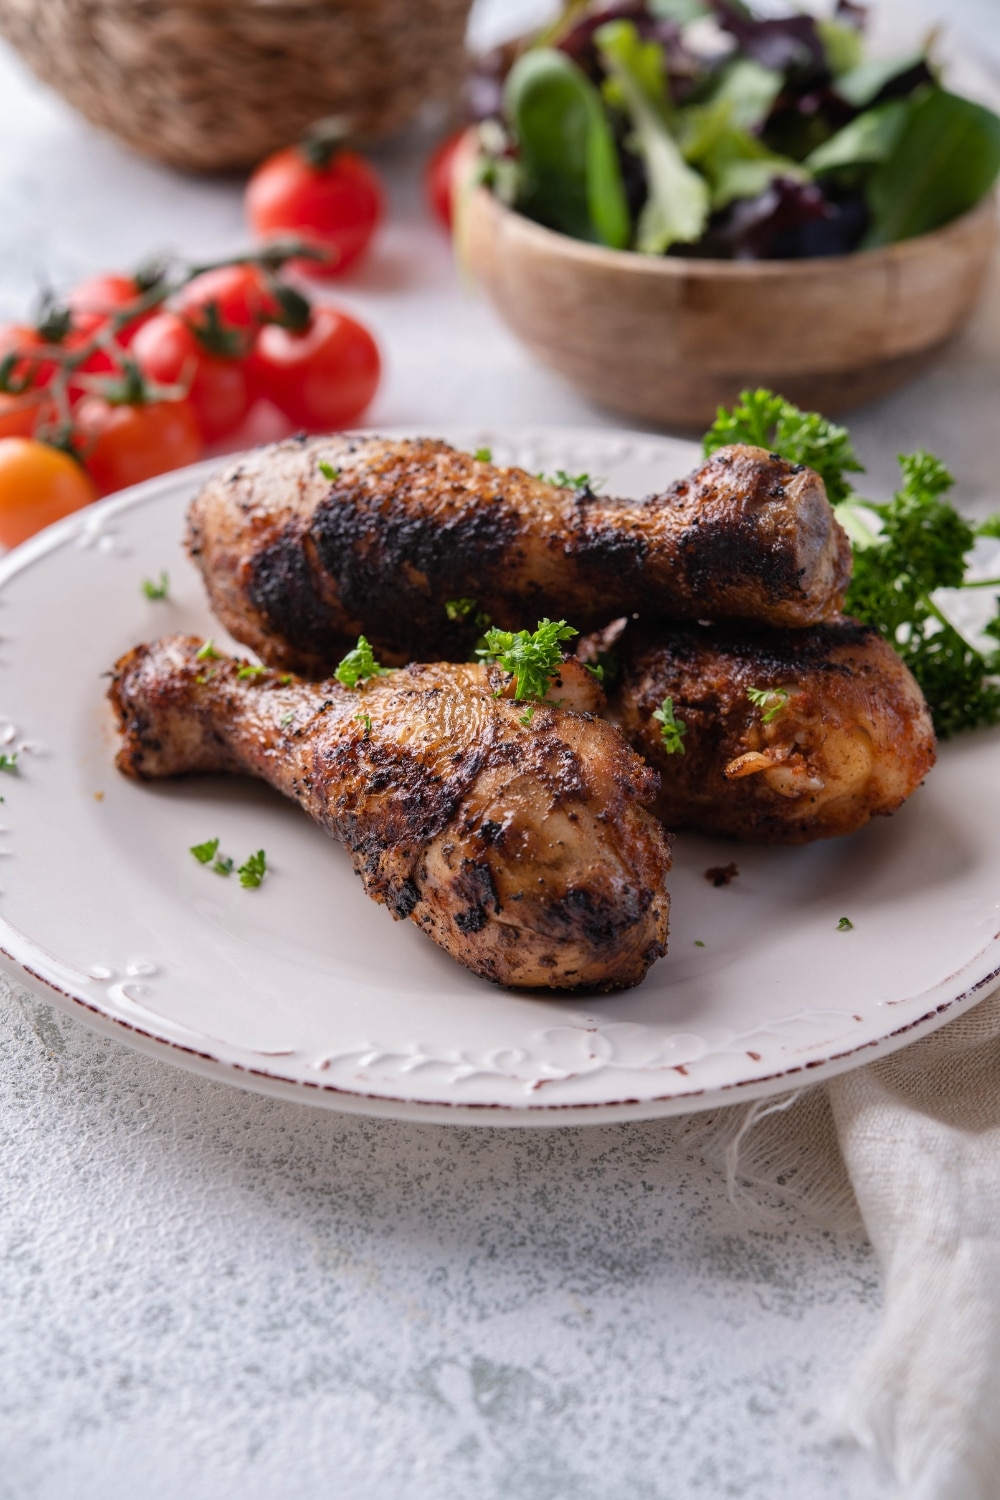 Three grilled chicken legs garnished with parsley on a white plate. Behind them is a bowl of salad and fresh cherry tomatoes.